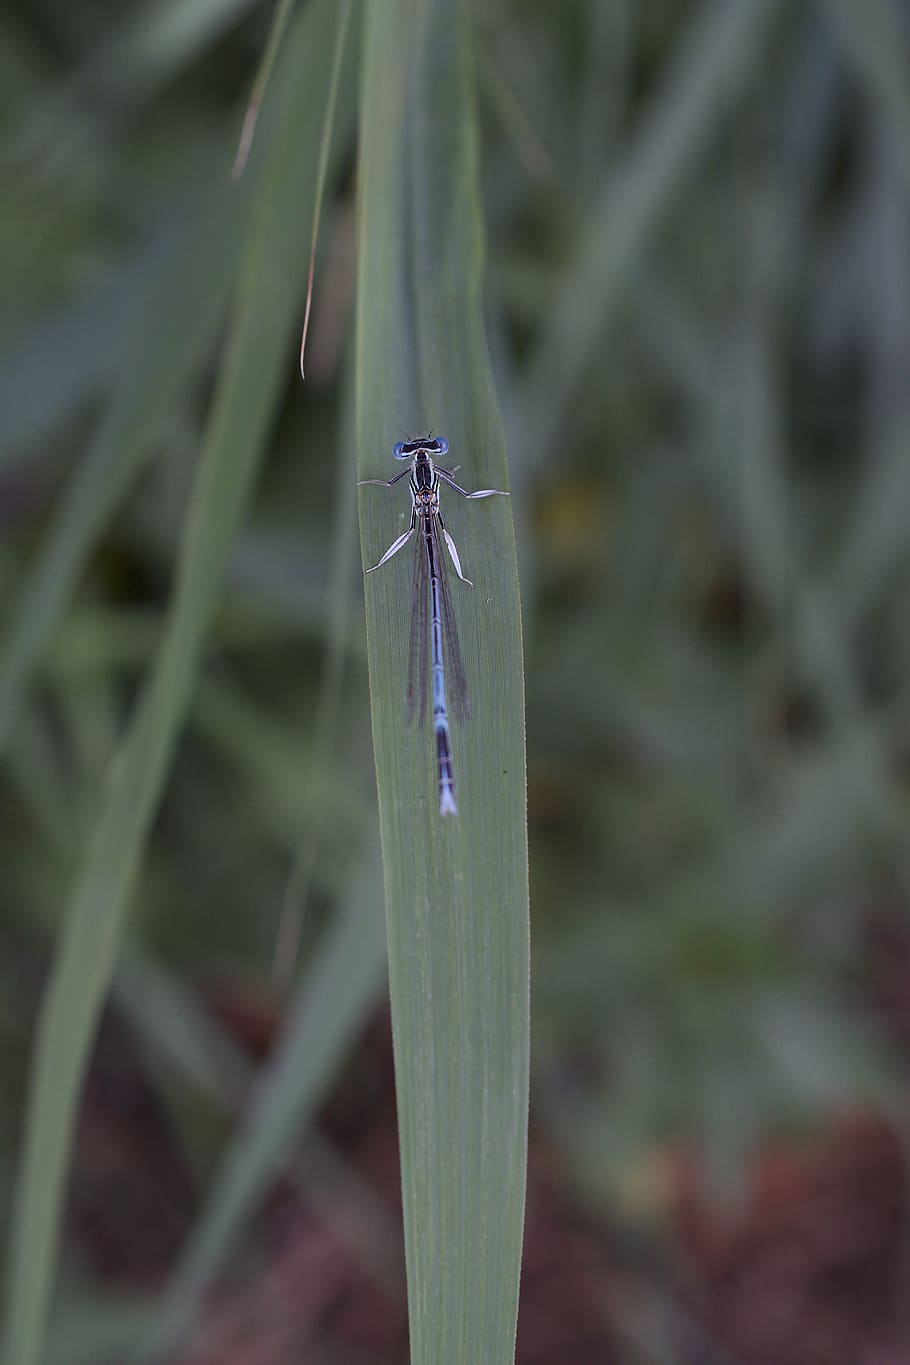 horseshoe-azure bridesmaid, dragonfly, blue dragonfly, reed, insect spring dragonfly, halm, coenagrion puella, small dragonflies, small dragonfly, azure bridesmaid